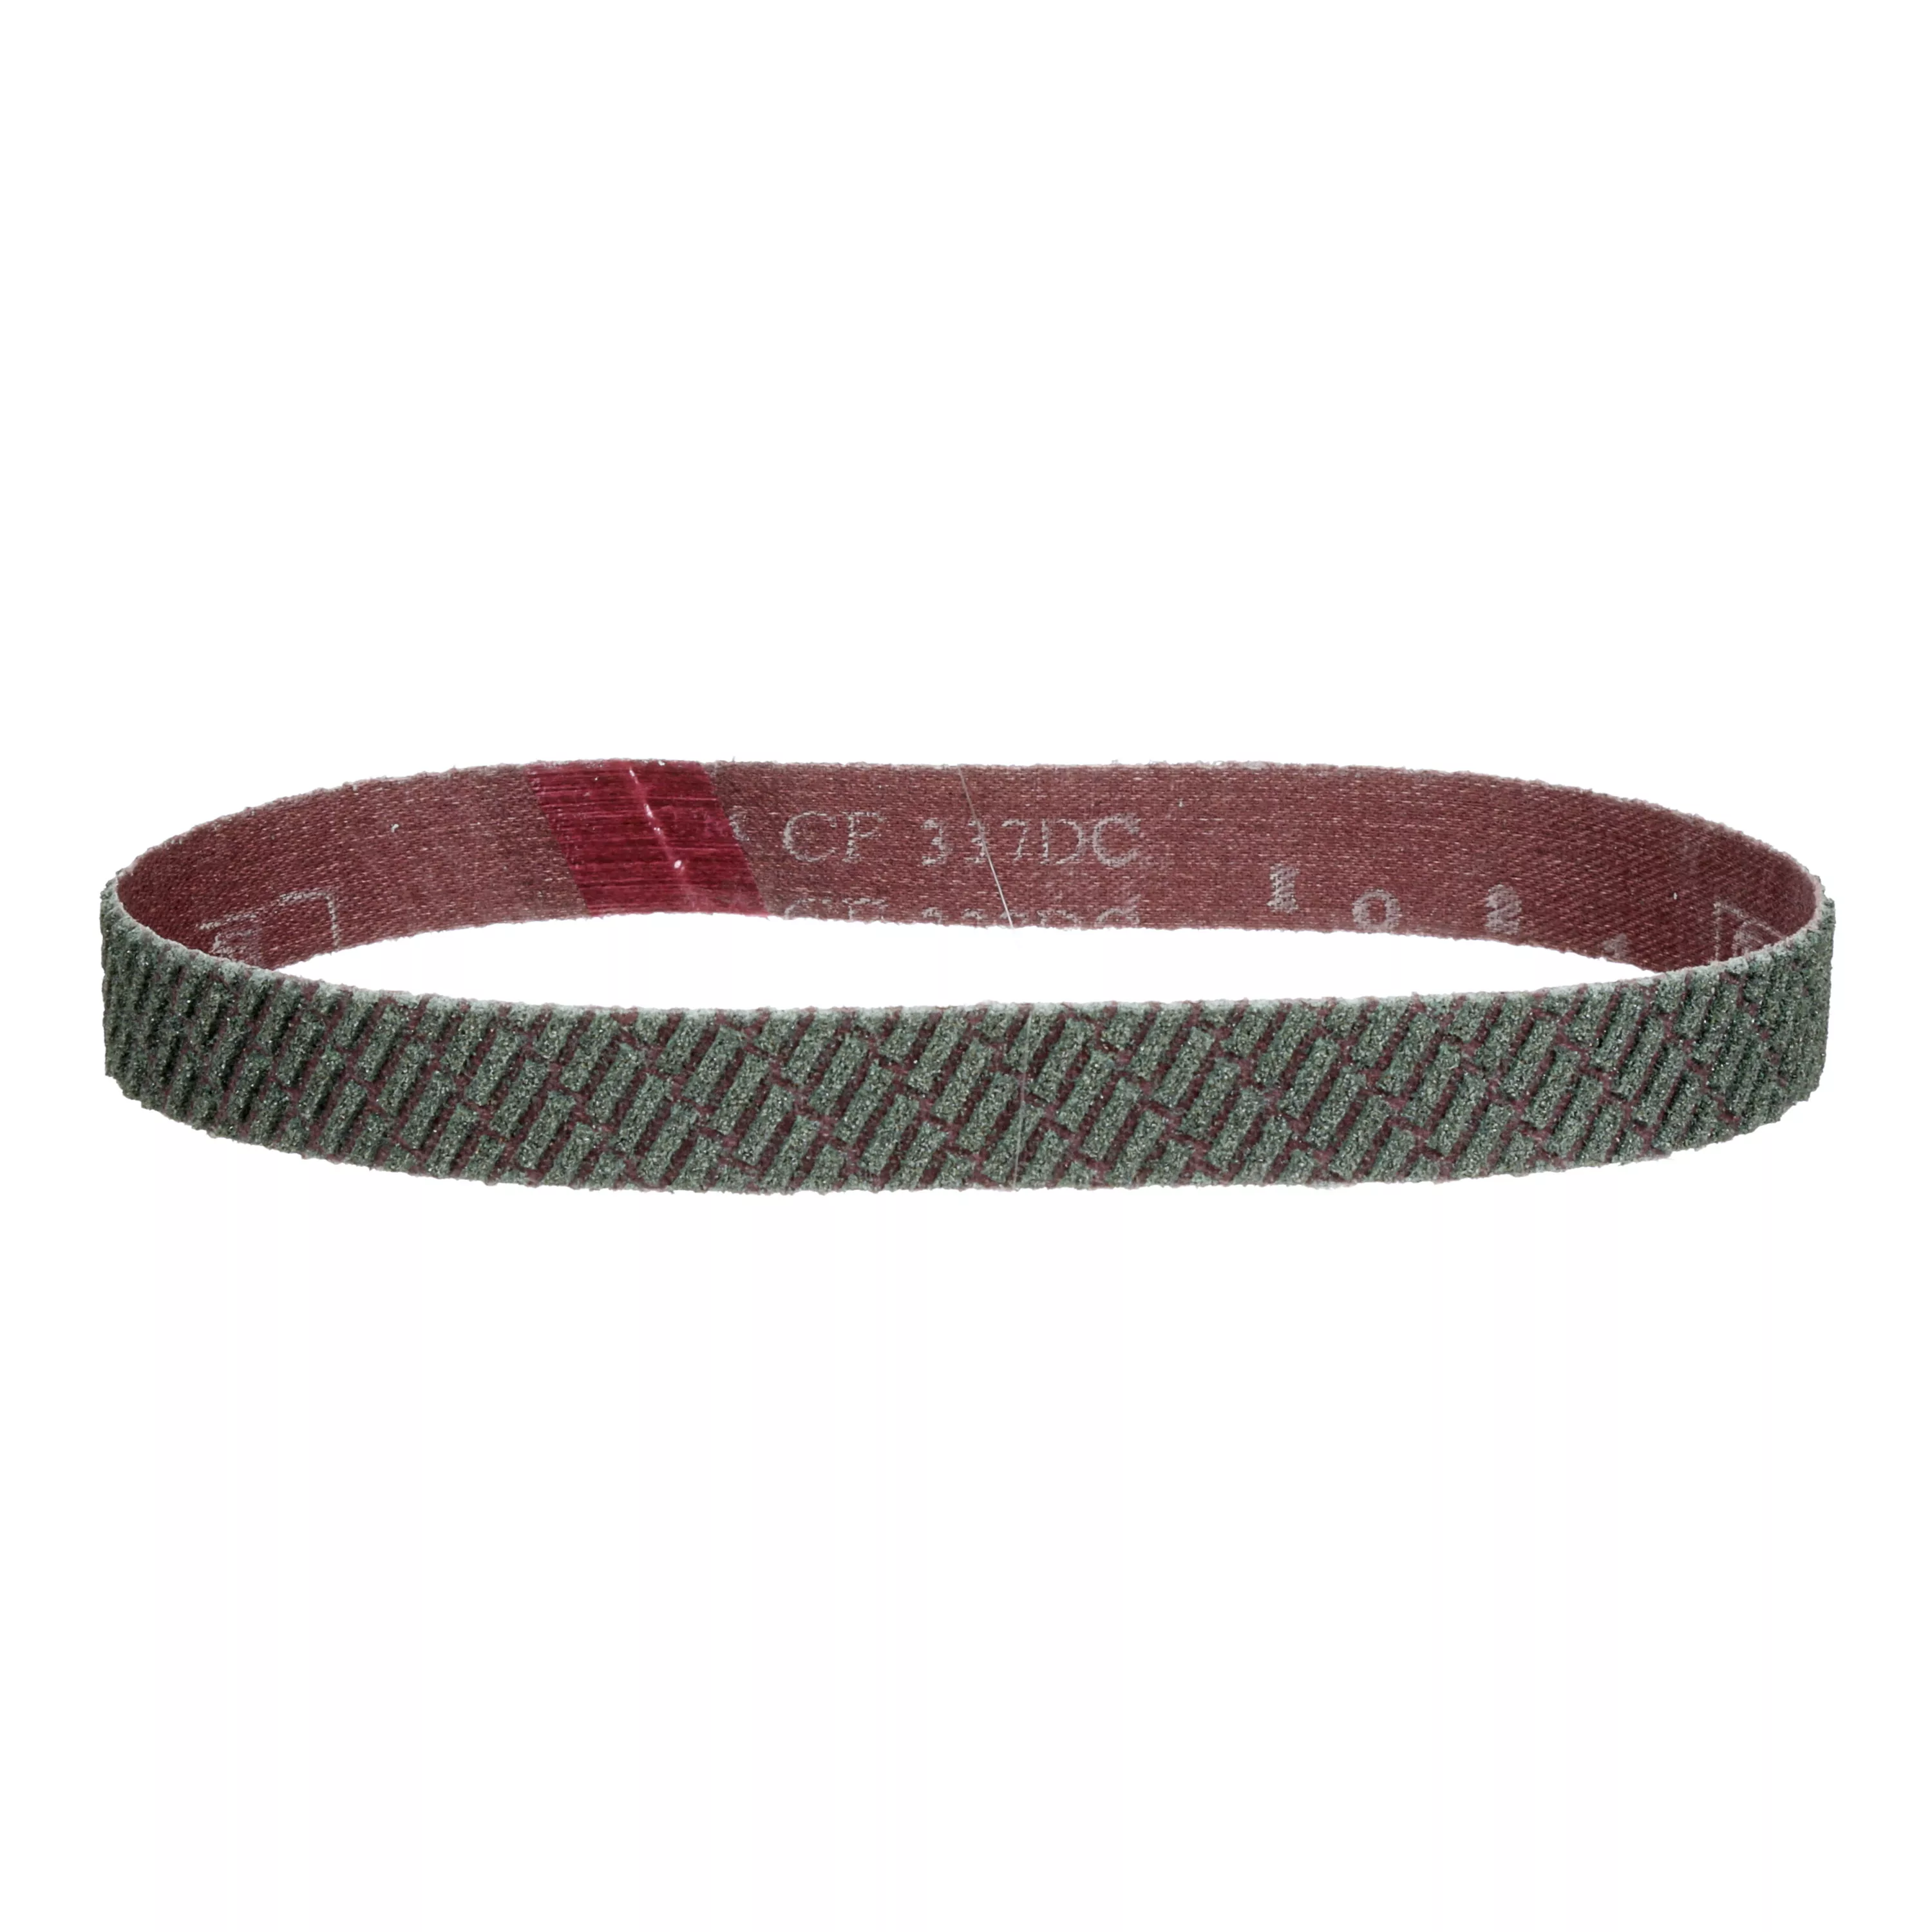 3M™ Trizact™ Cloth Belt 337DC, 1/2 in X 24 in A65 X-weight, 20 ea/Case